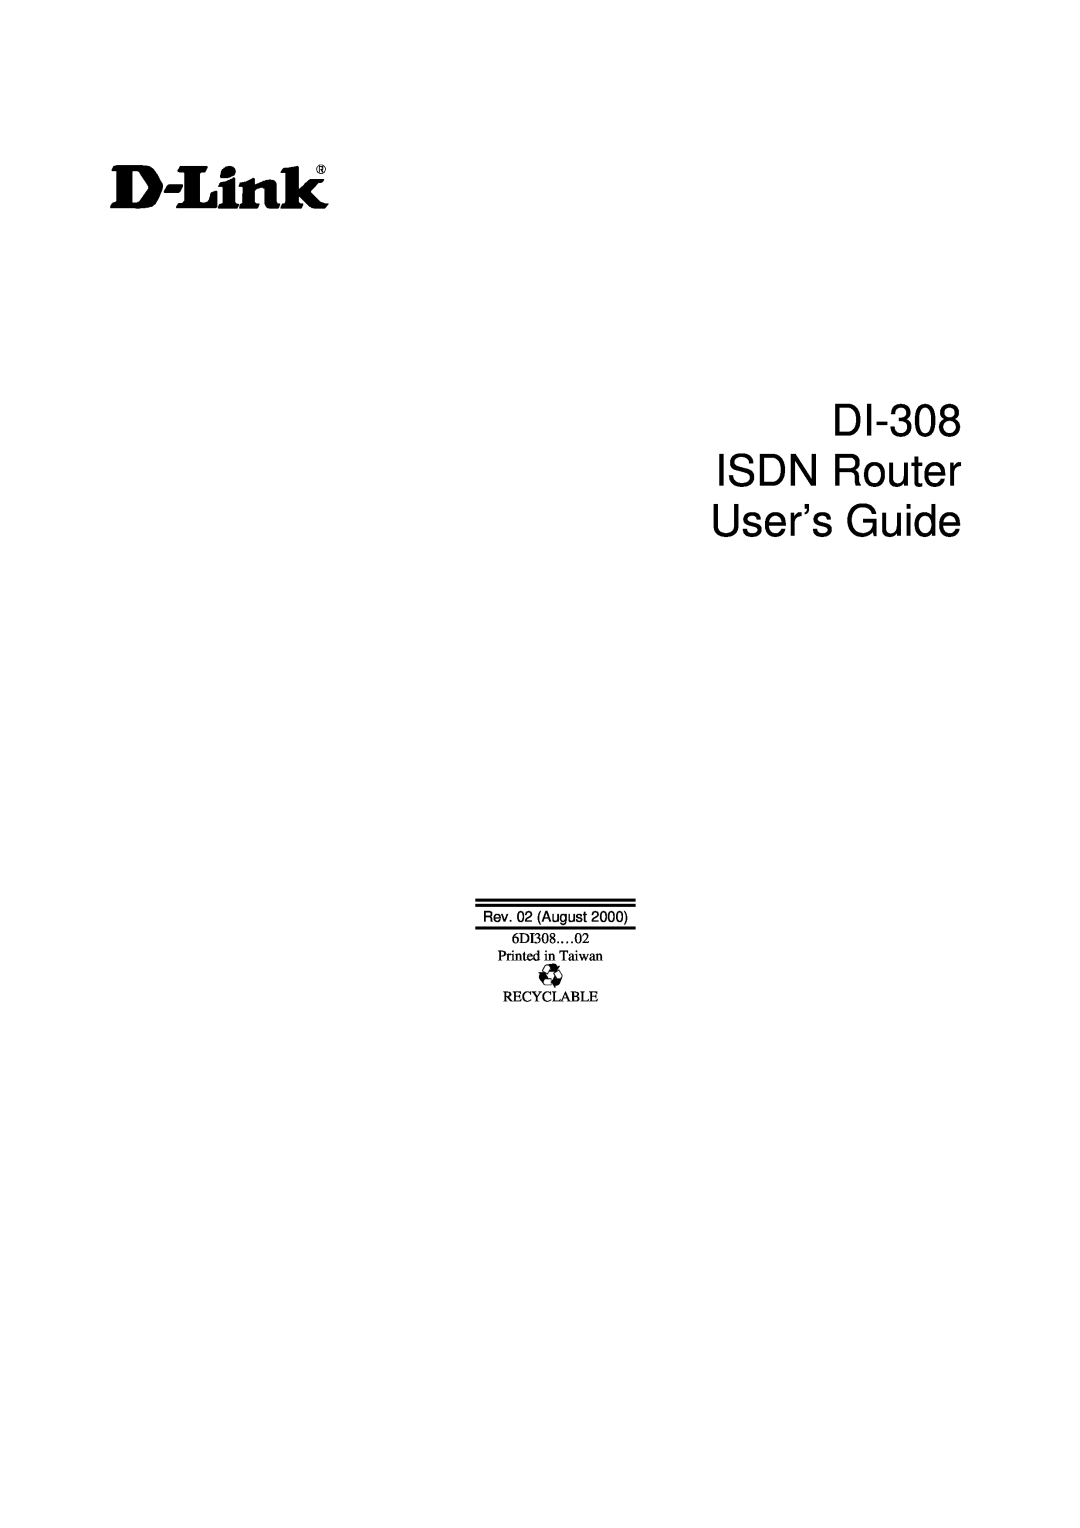 D-Link manual DI-308 ISDN Router User’s Guide, Rev. 02 August 